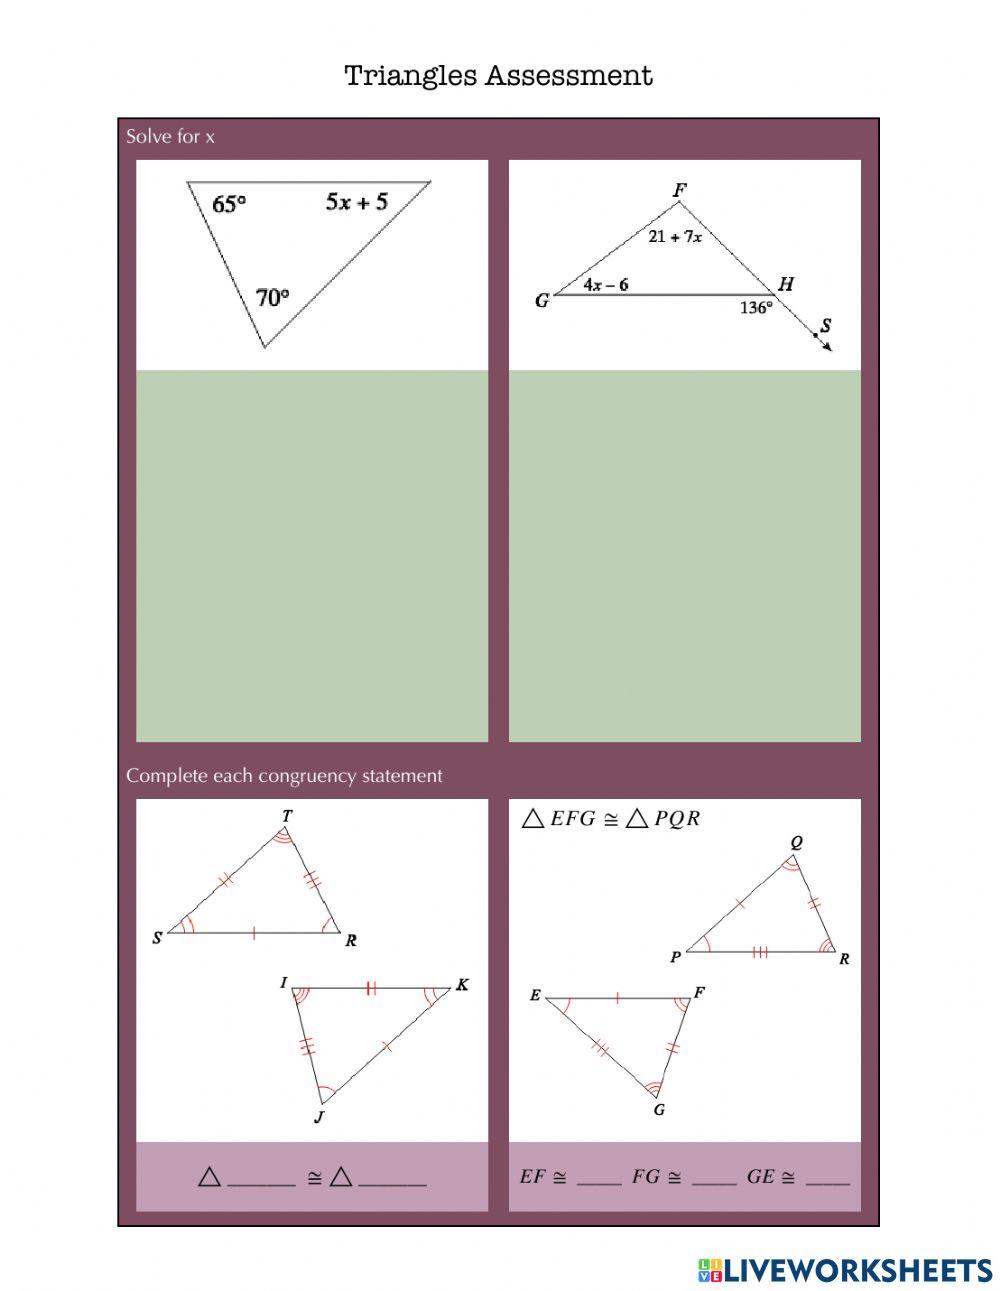 Triangles Assessment